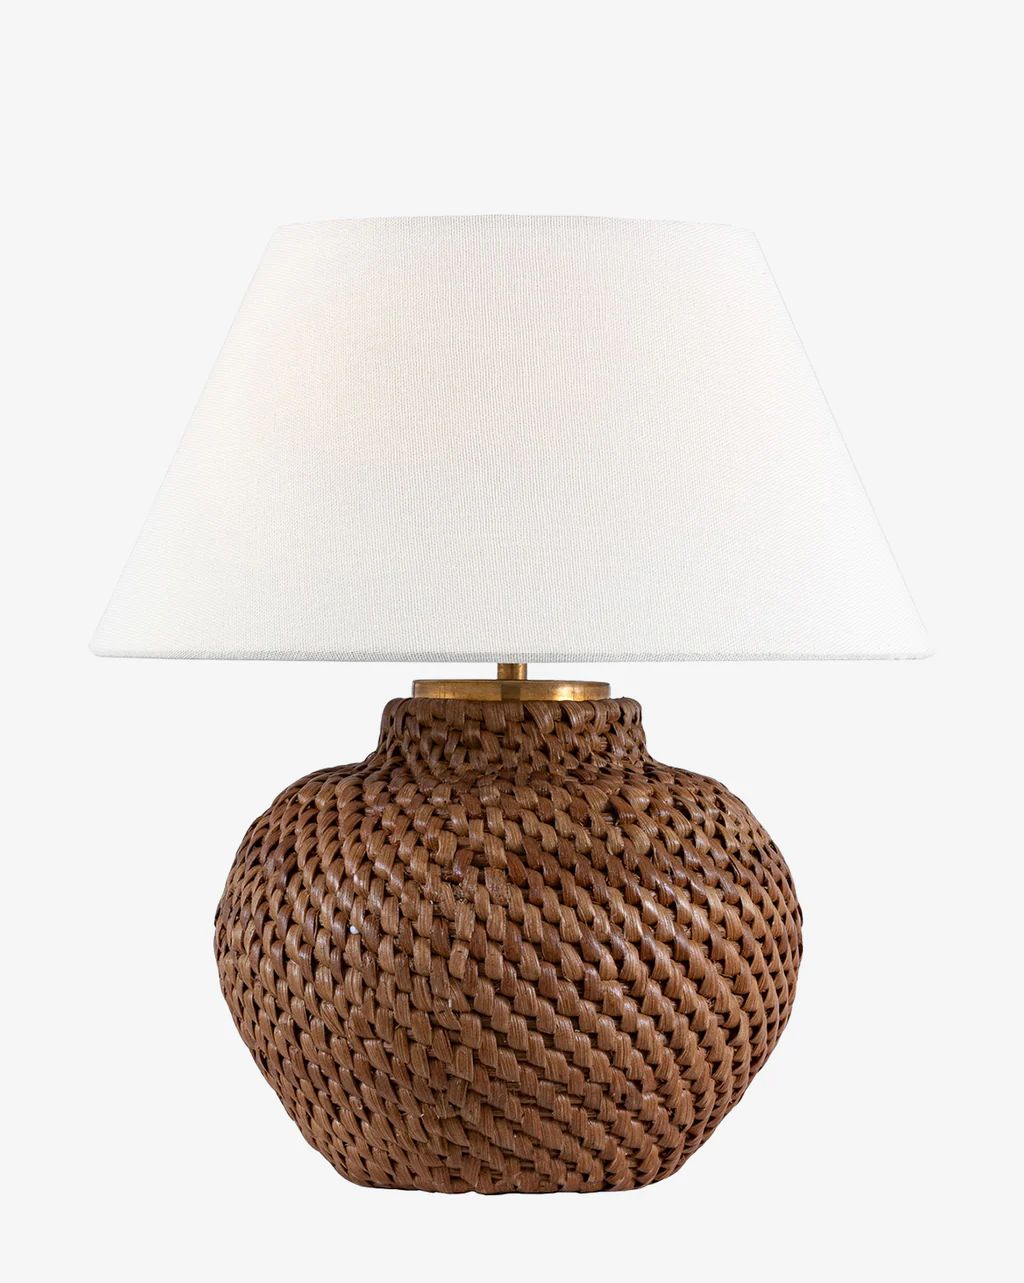 Avedon Cordless Accent Lamp | McGee & Co. (US)